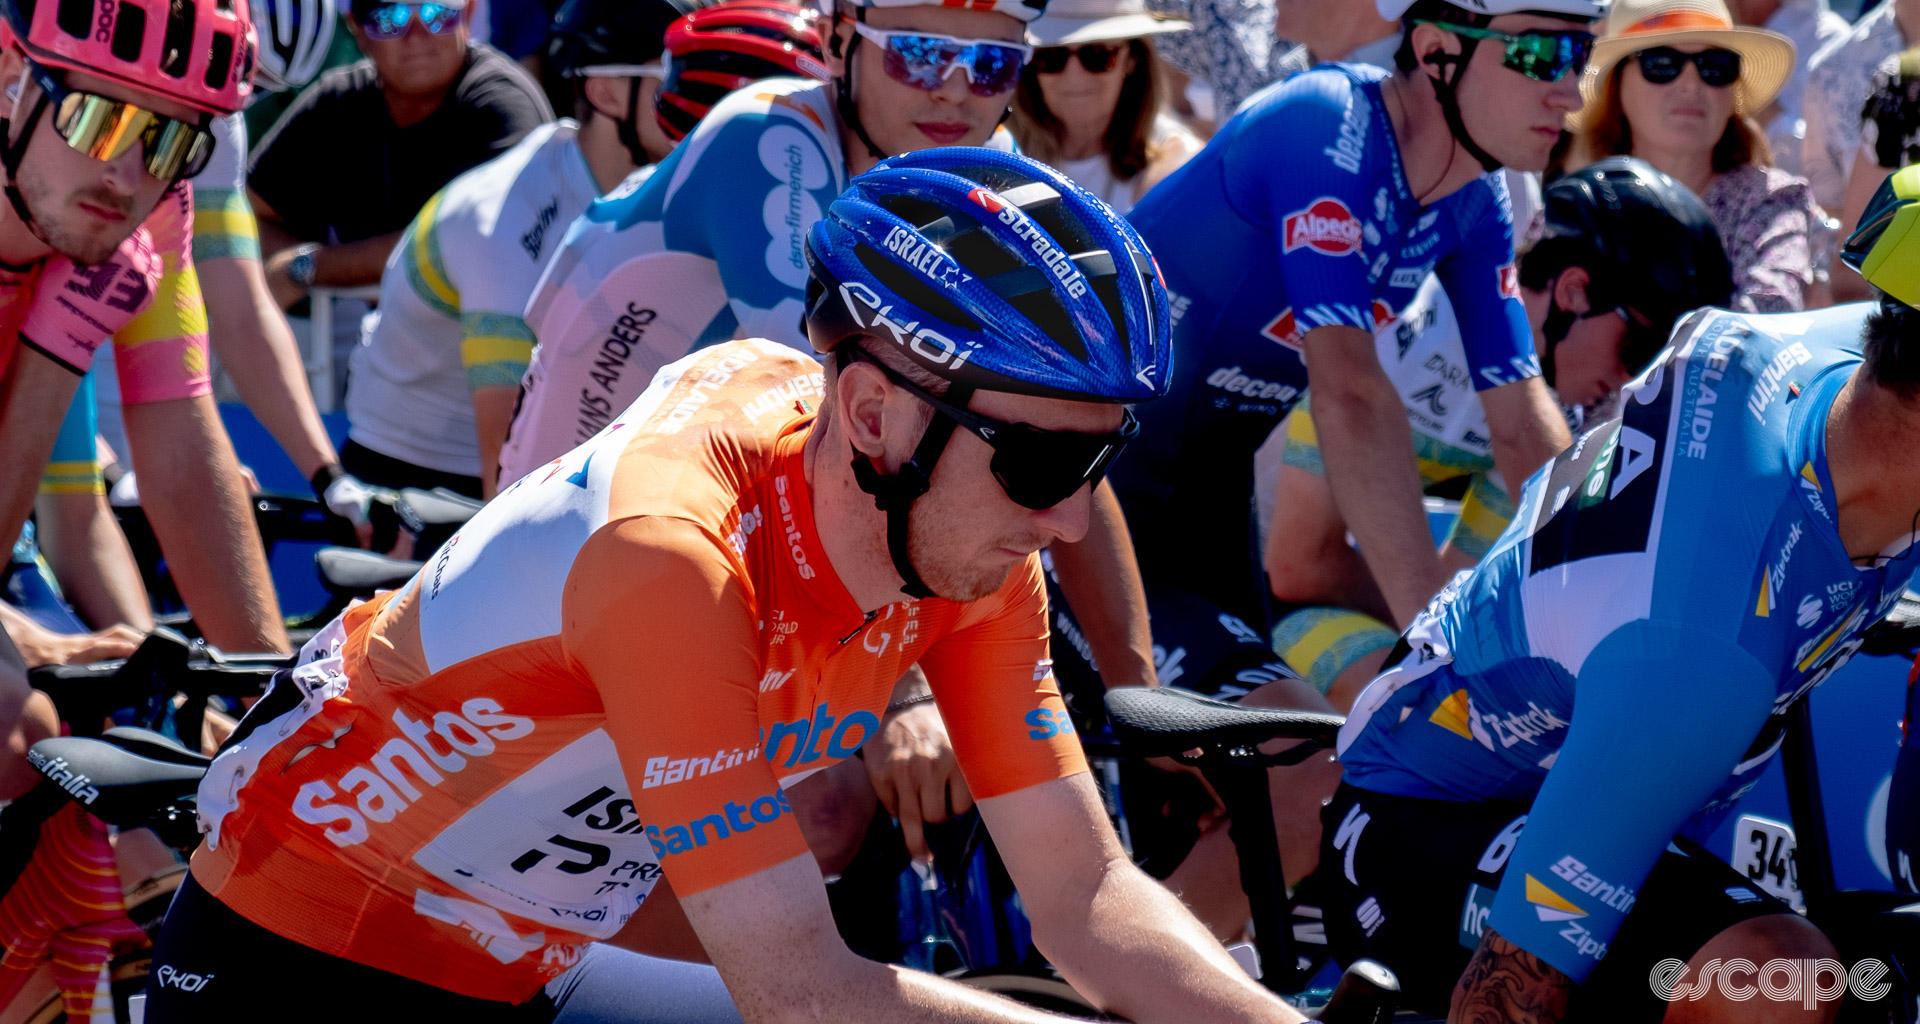 The photo shows Stevie Williams waiting for the stage start in the Tour Down Under's leader's jersey with a blue Ekoi Legende vented helmet.